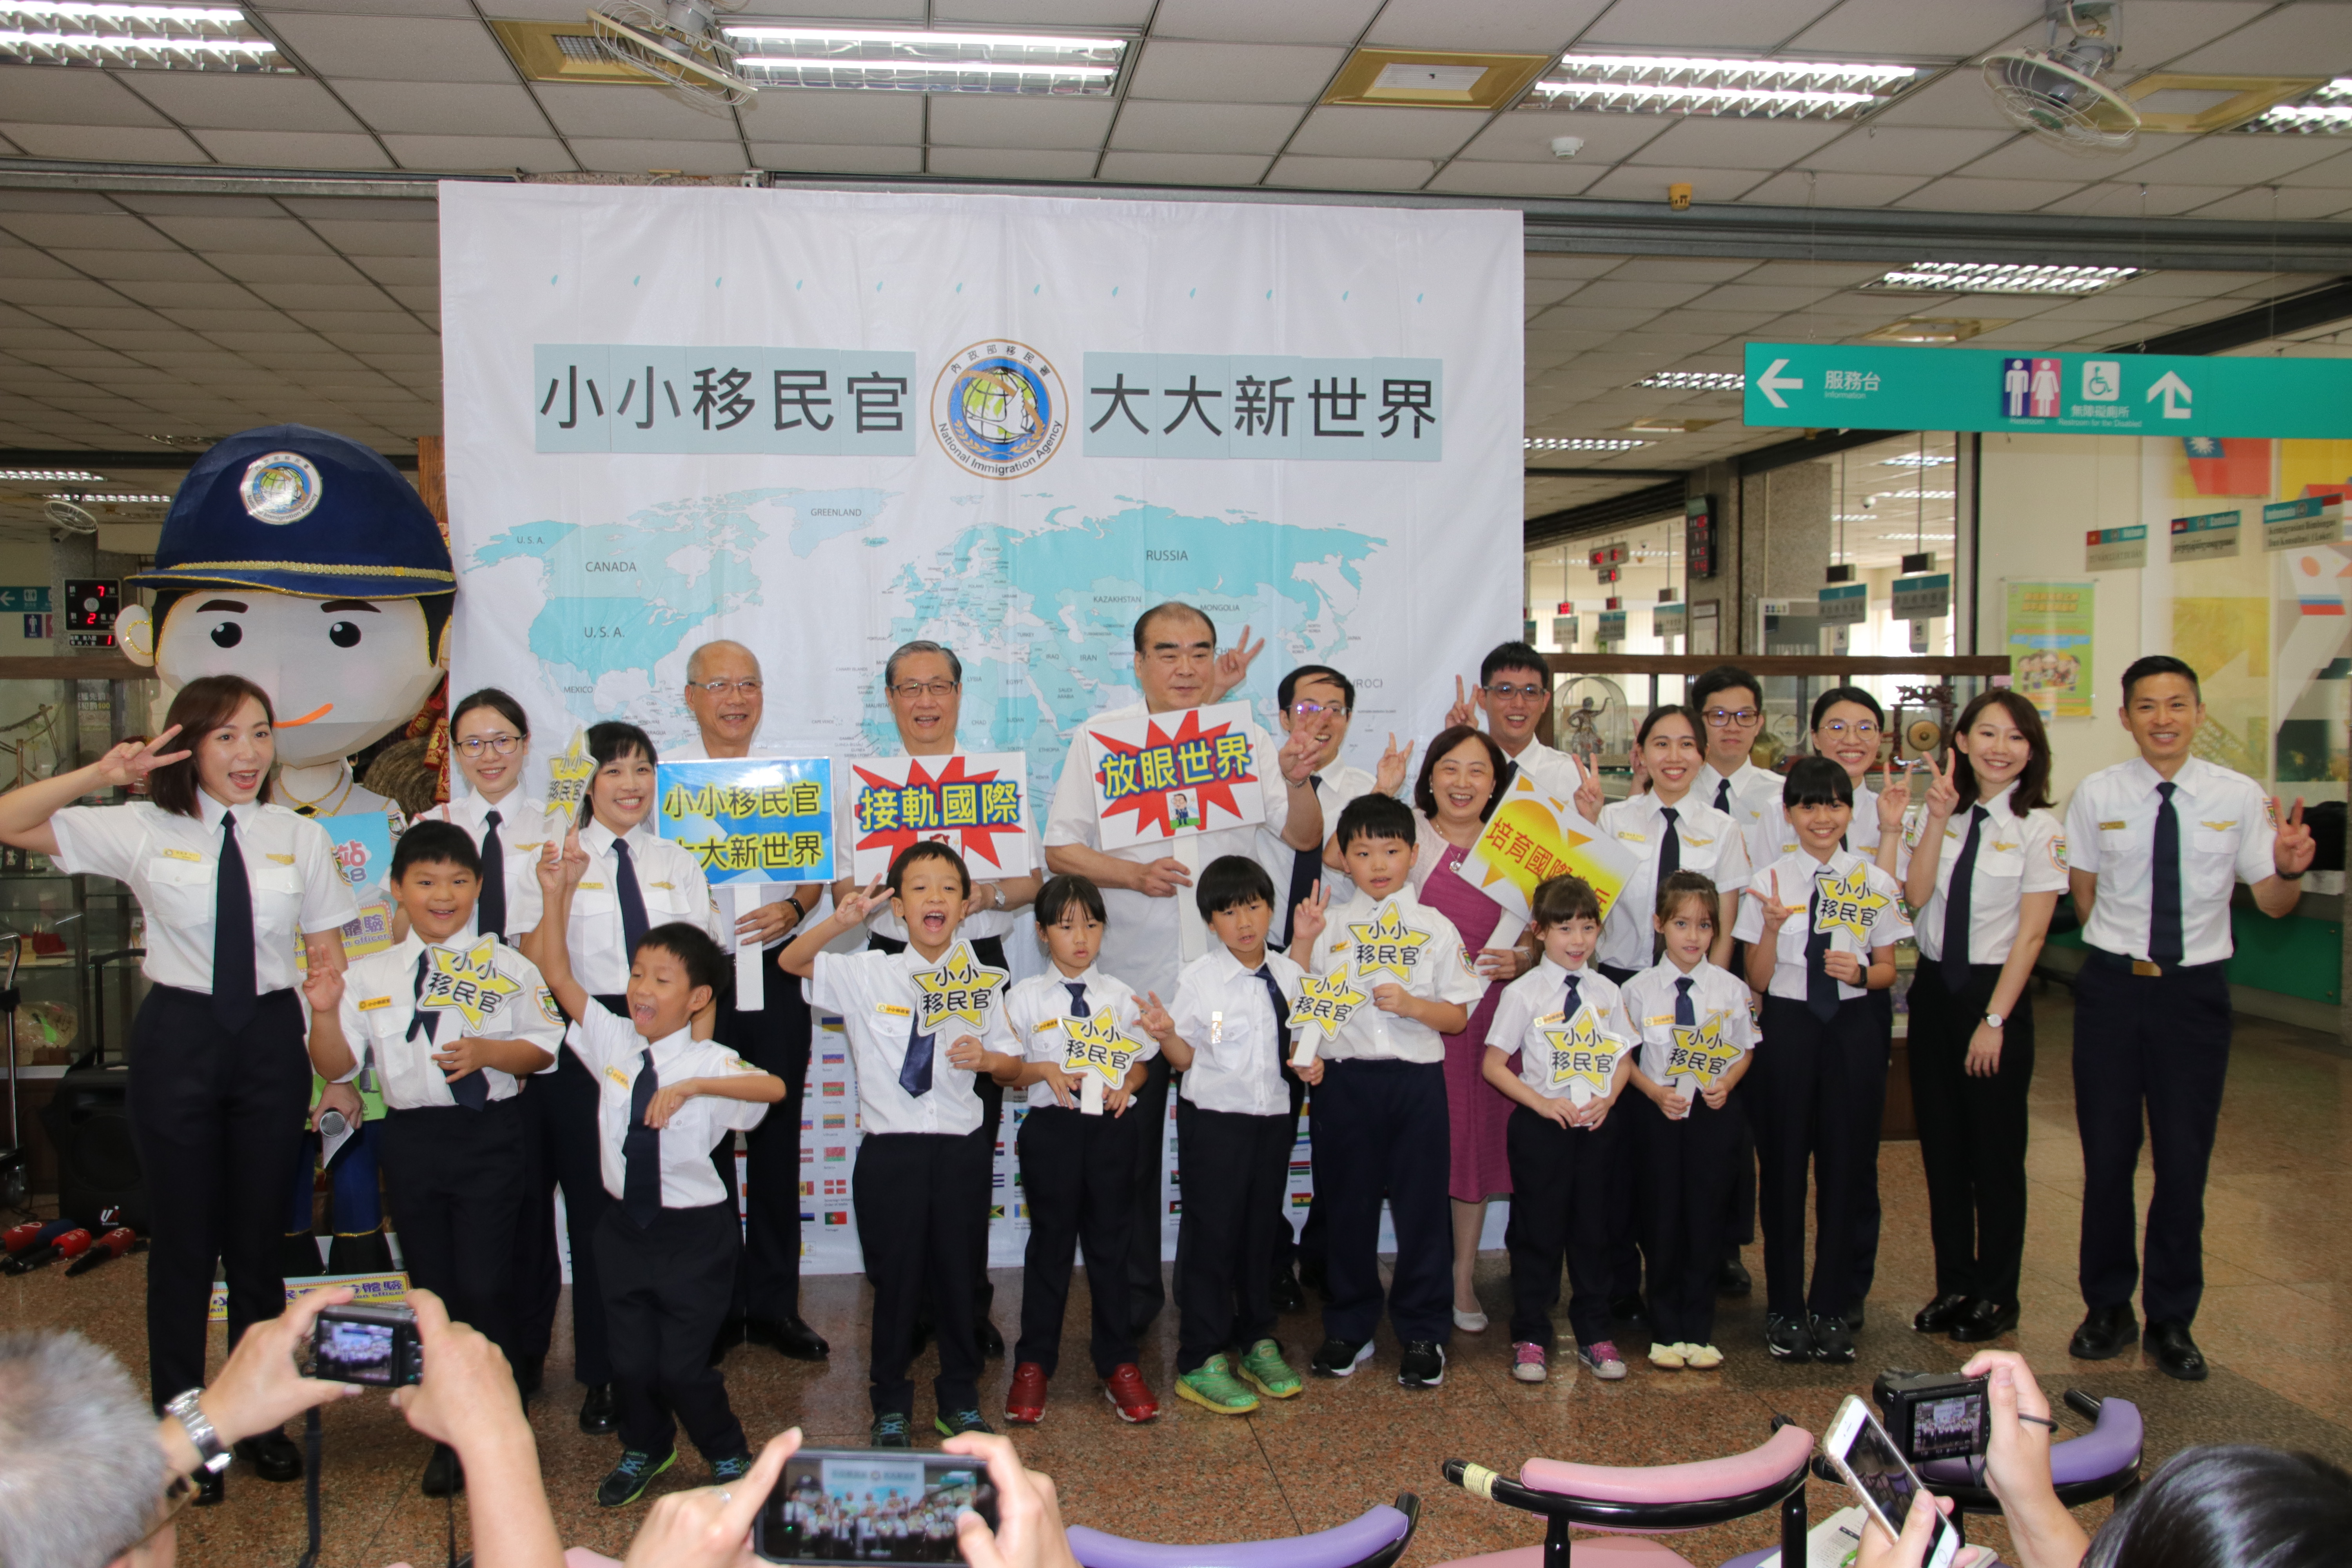 The head of NIA, Chiu Feng-kuang (邱豐光), the officers, and children took picture together 